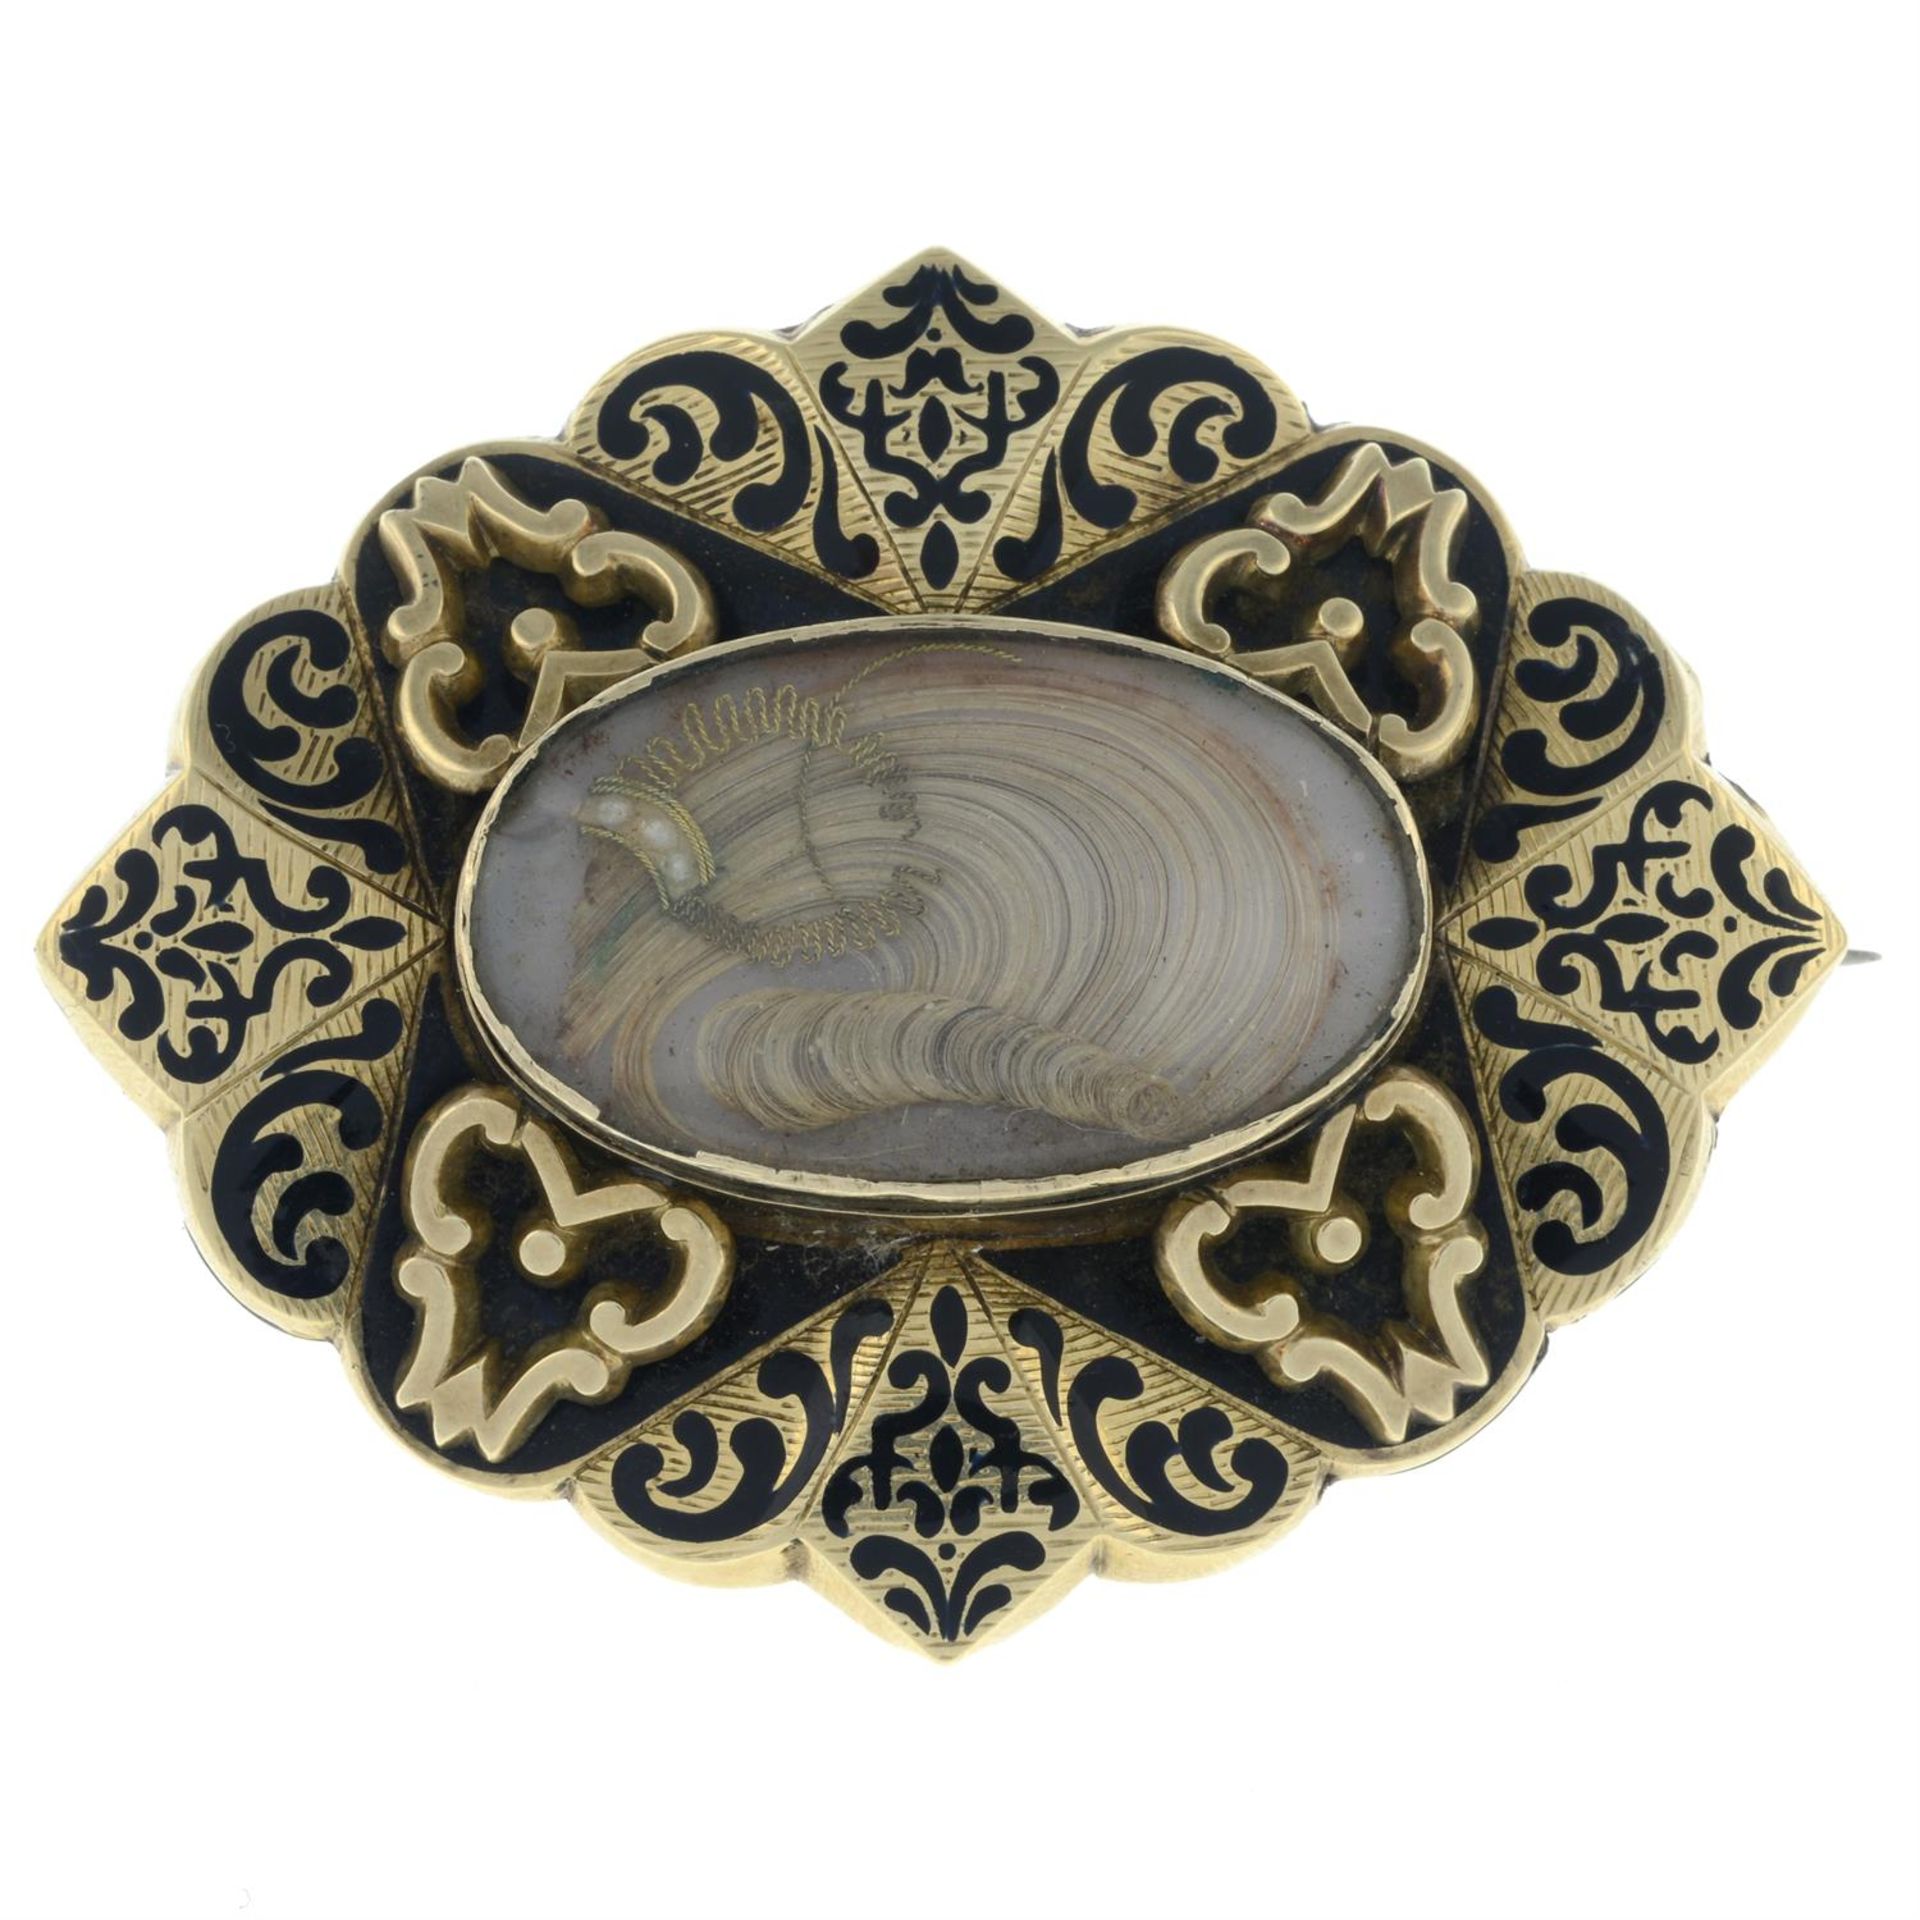 A Victorian enamel mourning brooch, with hairwork panel.